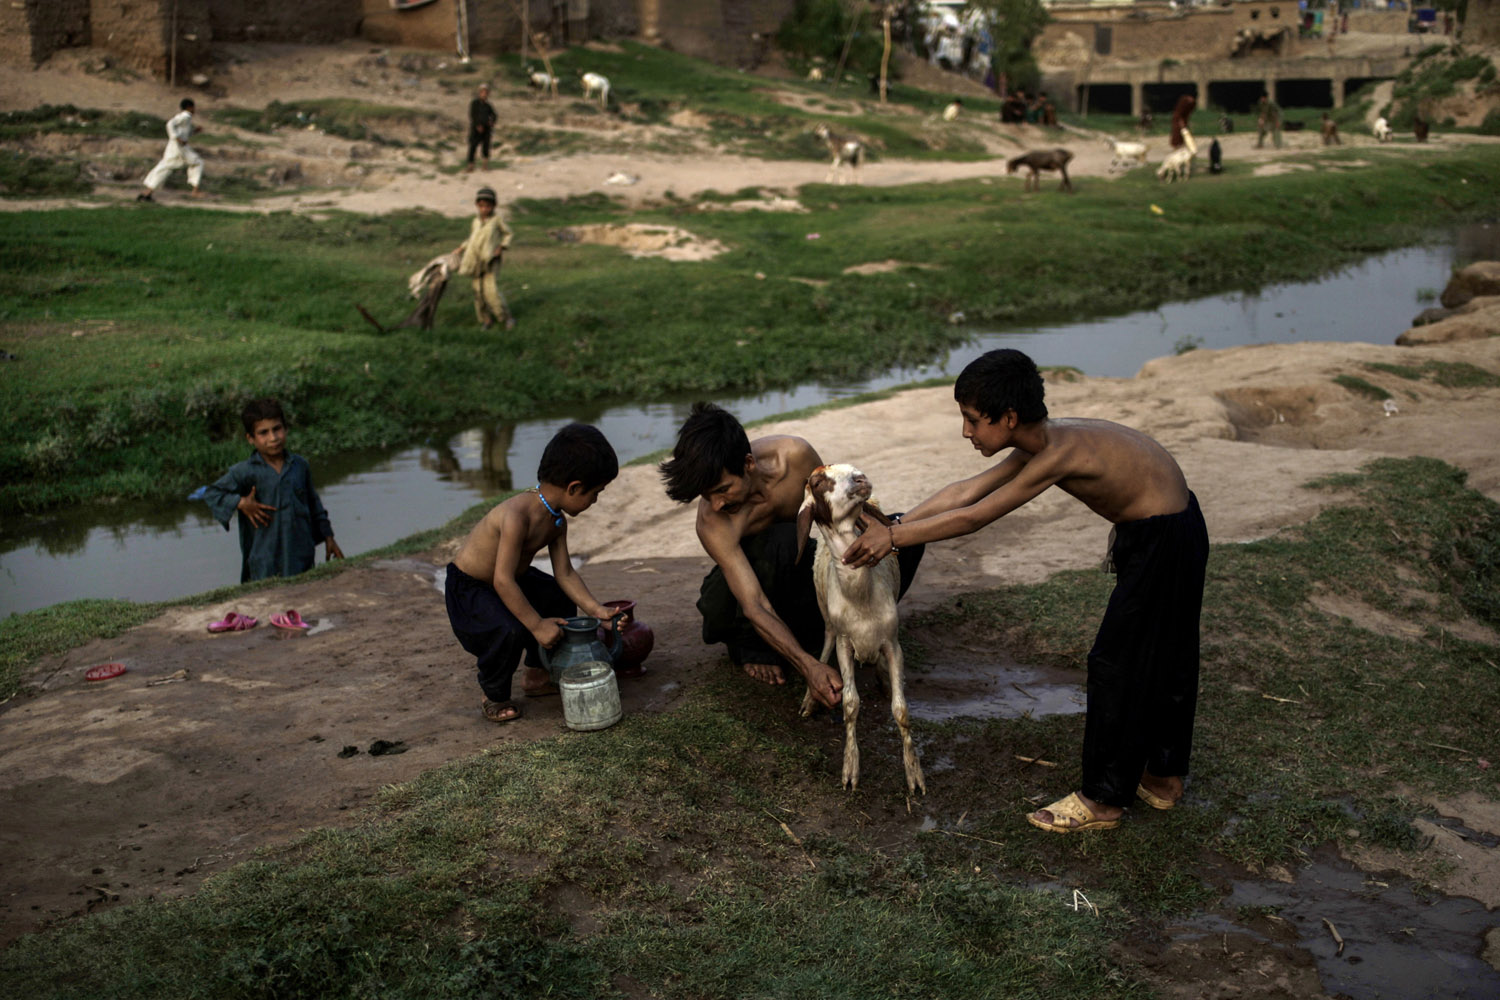 June 24, 2013. A Pakistani man and his two sons wash their goat by a polluted stream on the outskirts of Islamabad.